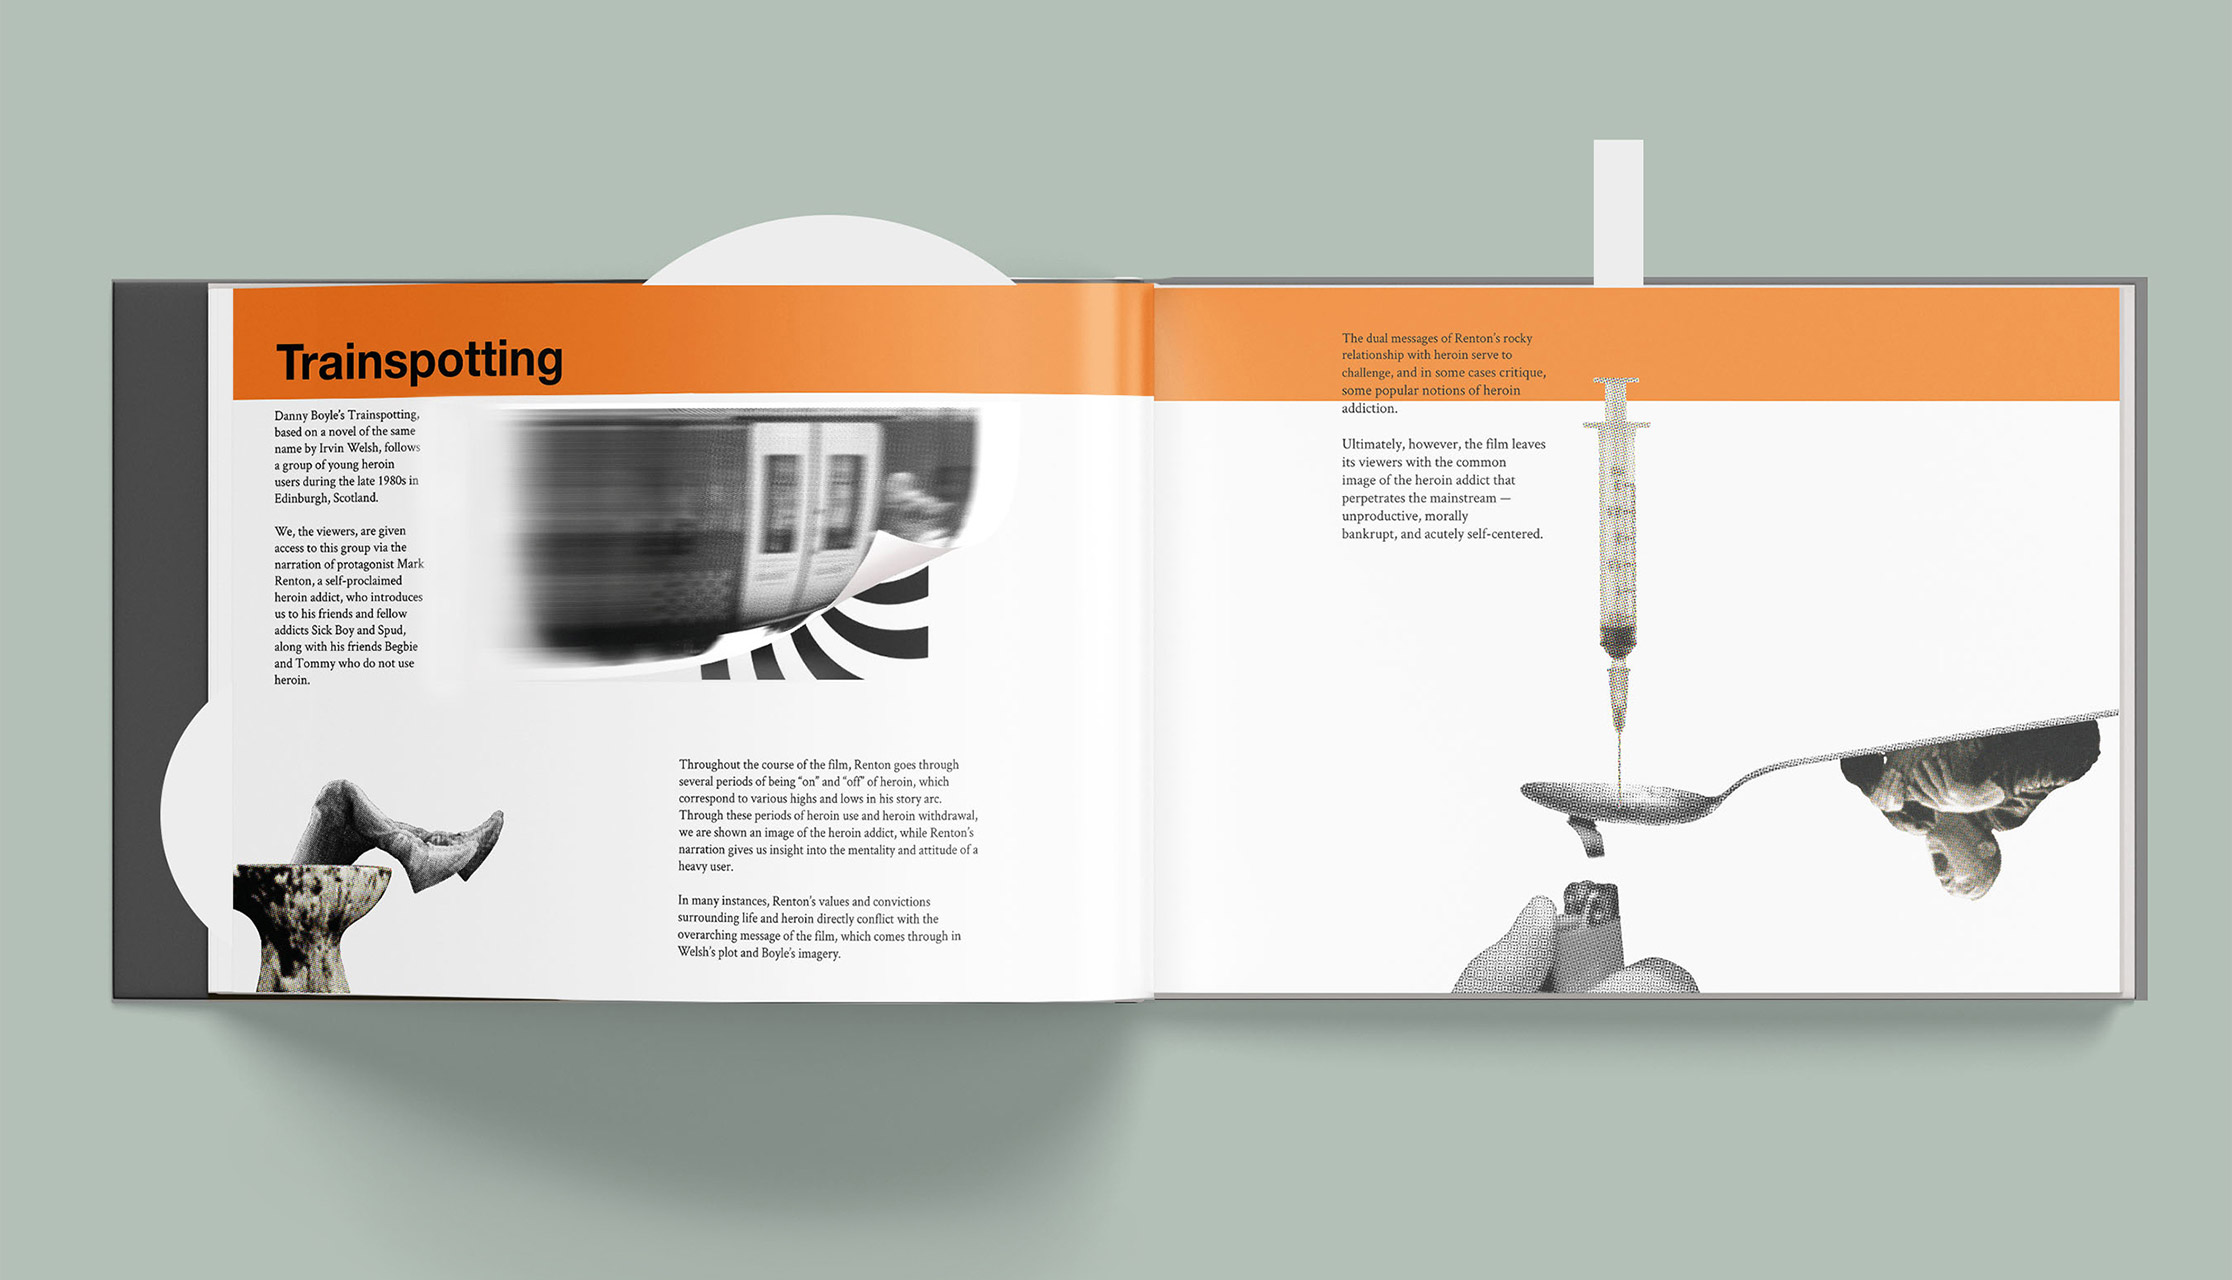 Mock-up of interactive spread for the film, Trainspotting